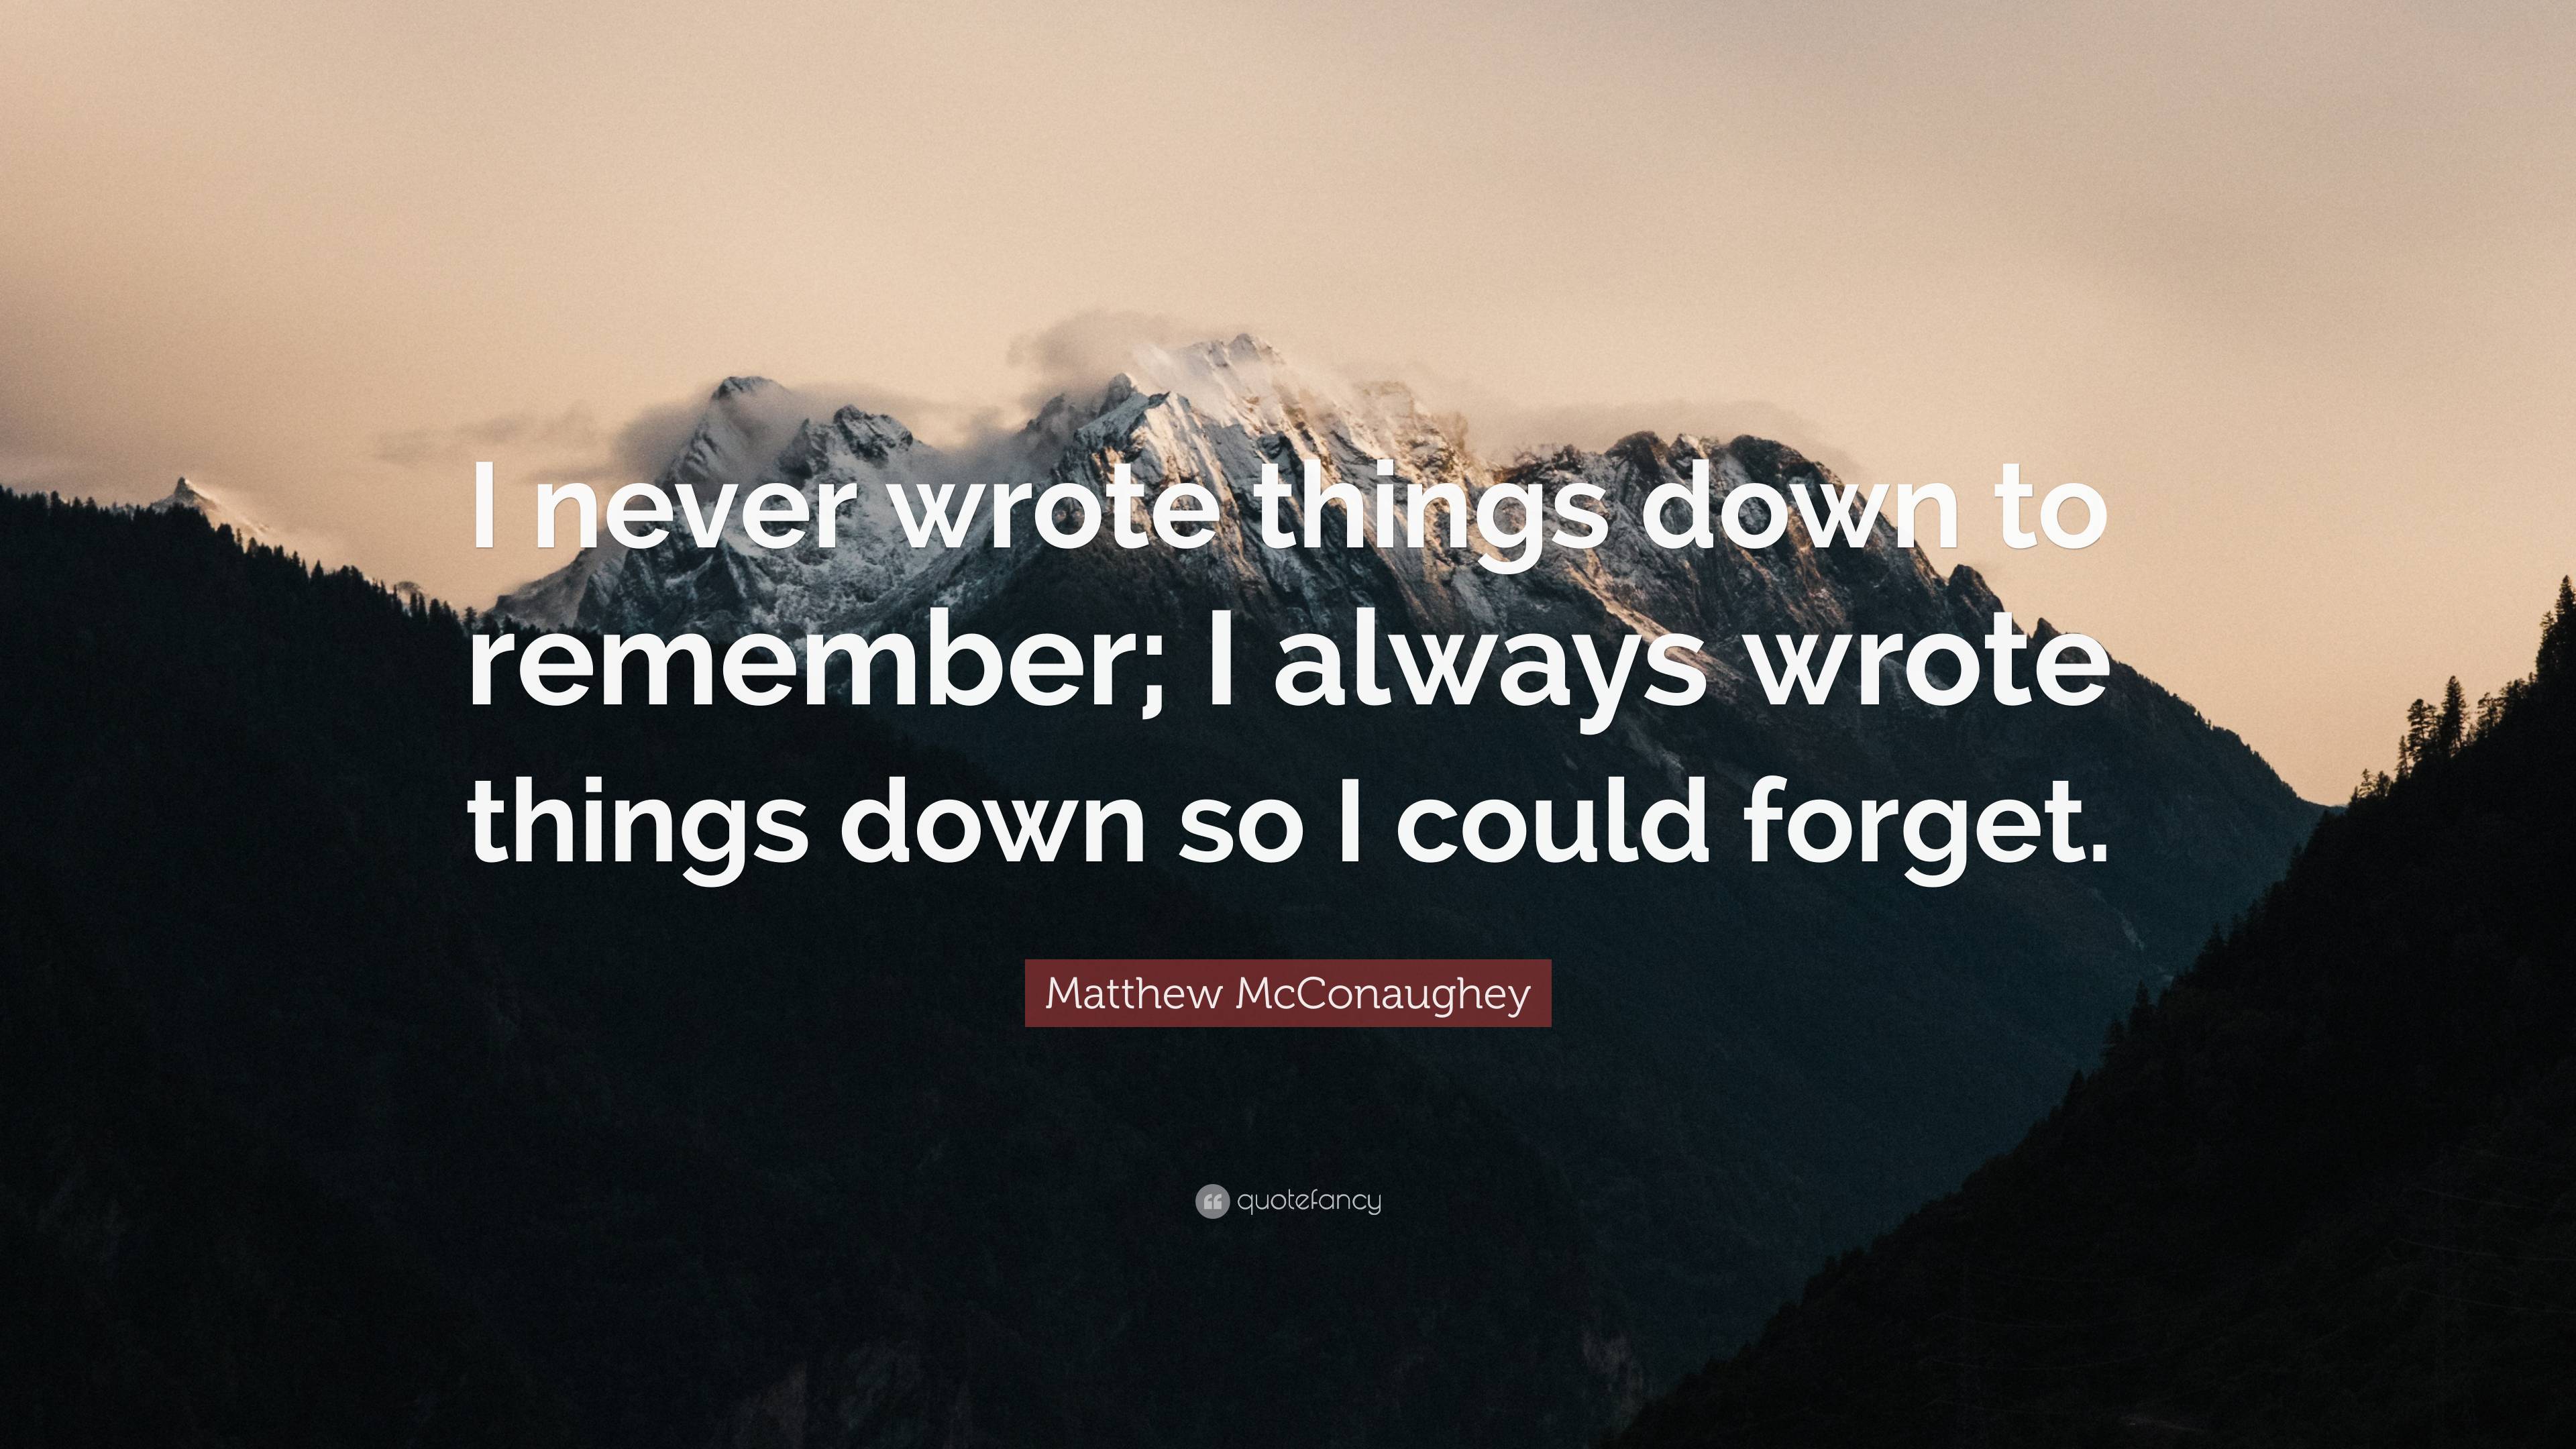 Matthew McConaughey Quote: “I never wrote things down to remember; I ...